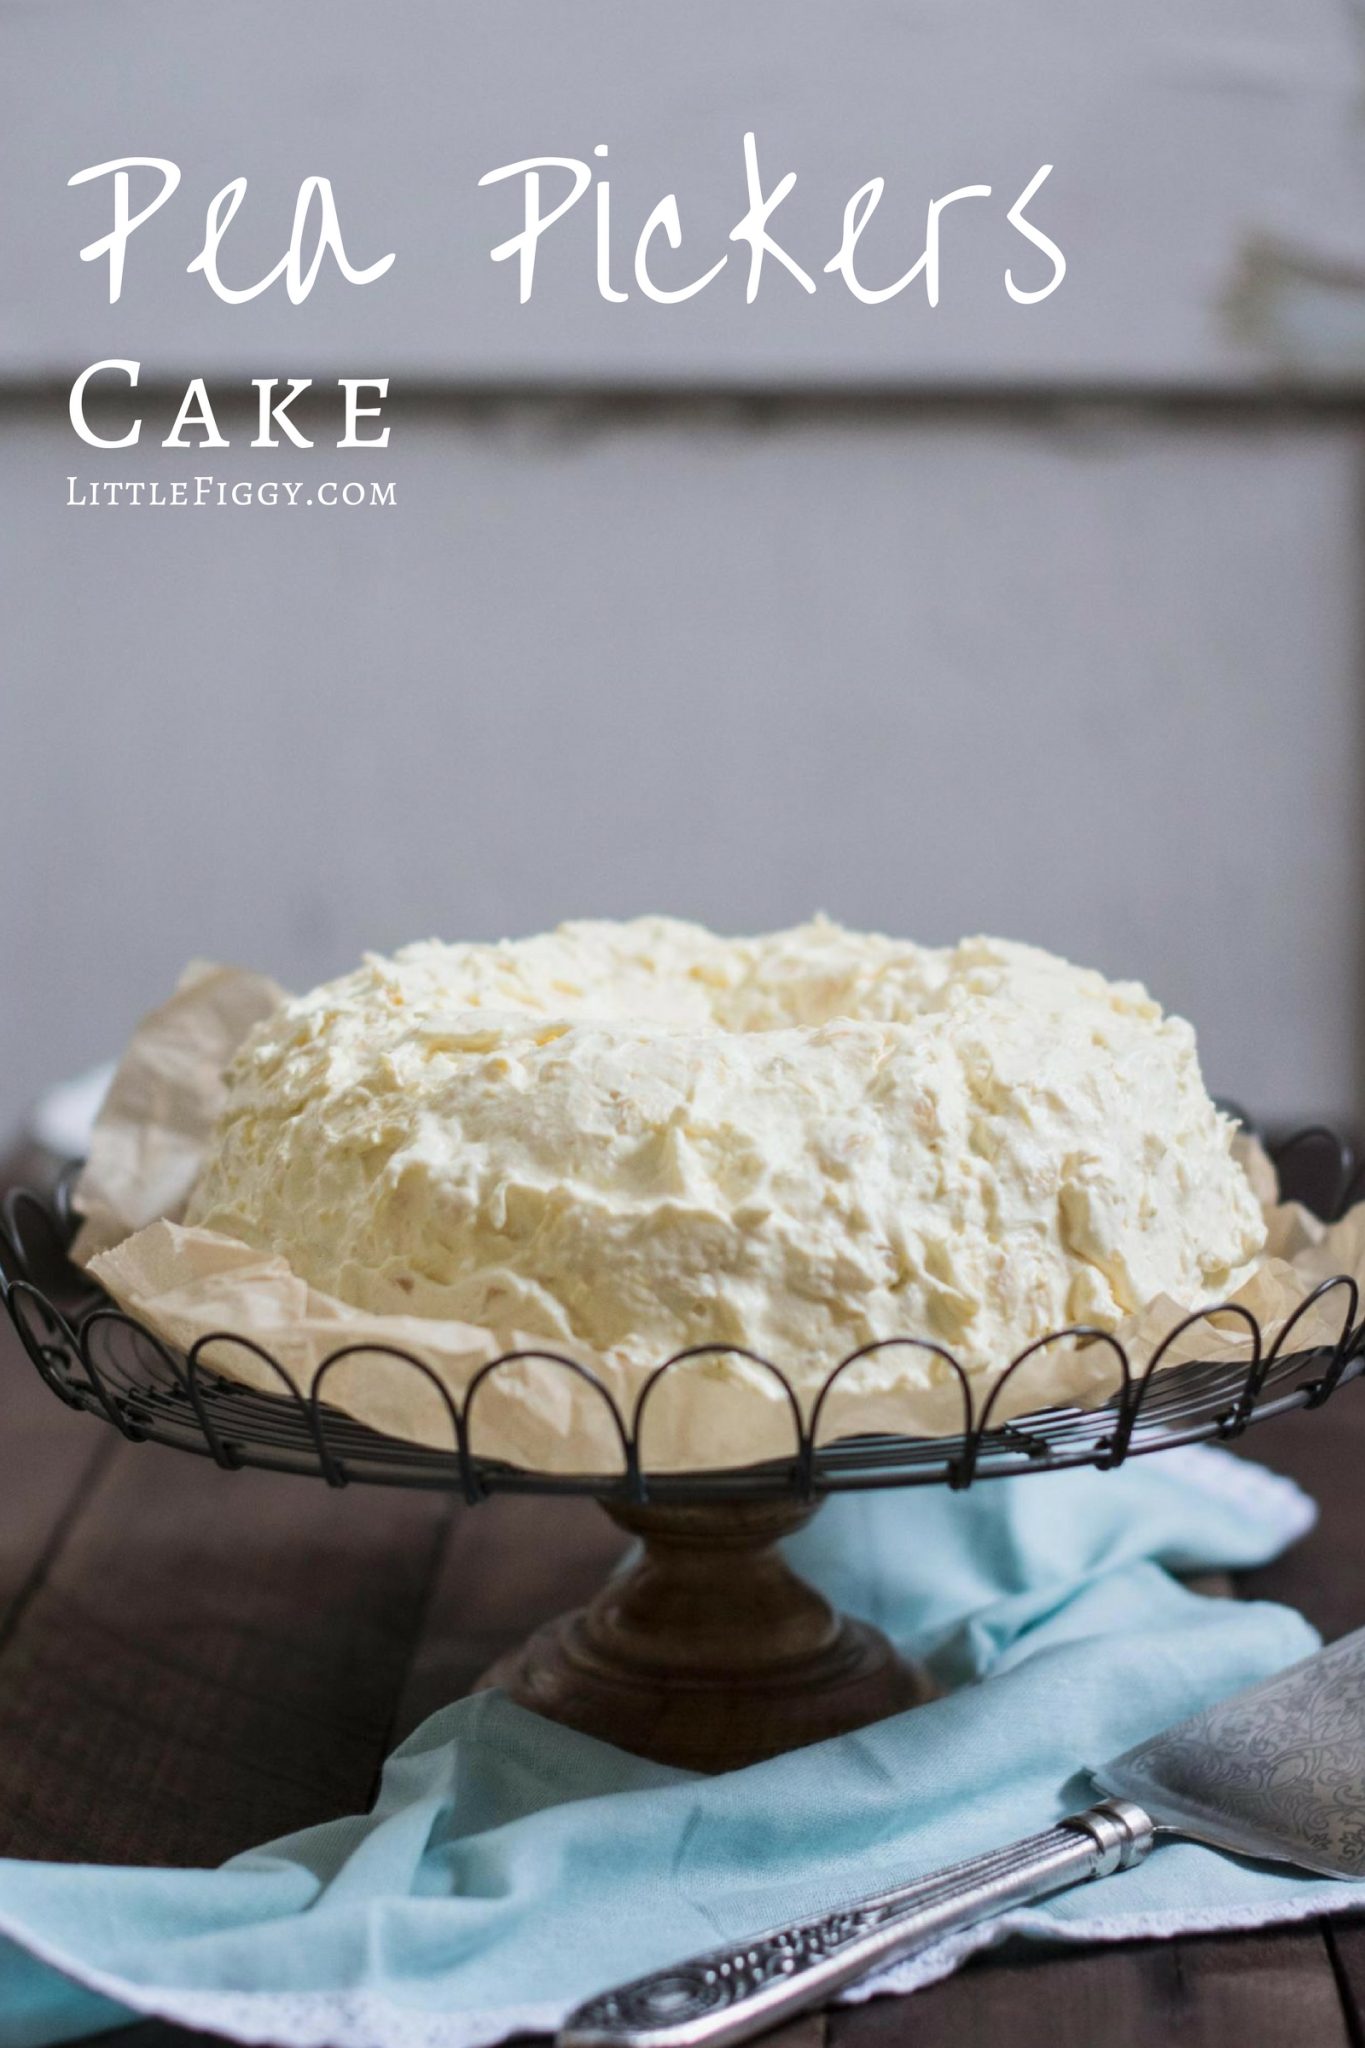 Pea Pickers Cake (also known as Cool Whip Cake), a childhood favorite that's easy to make and full of mandarin oranges and crushed pineapple! Recipe at Little Figgy Food